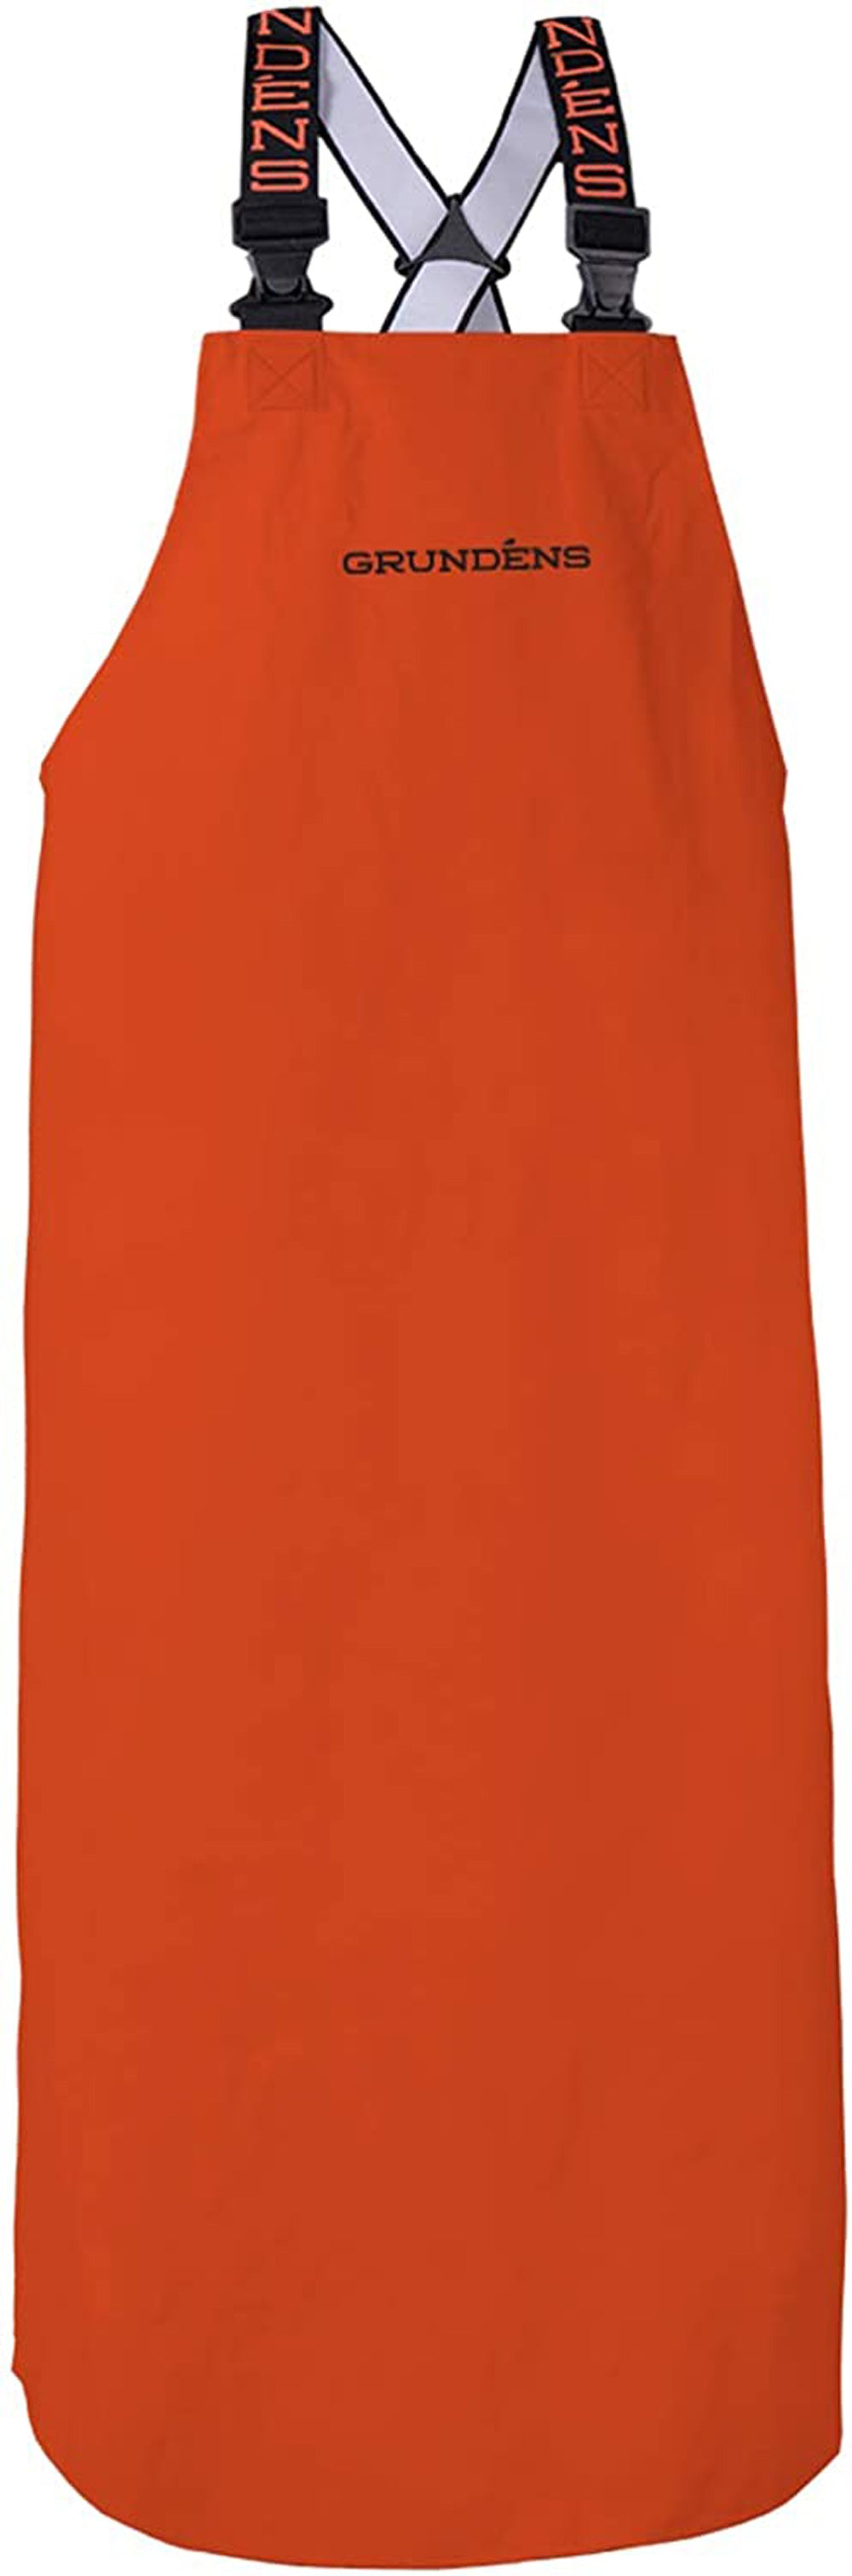 Shoreman PVC Apron in Orange color from the front view